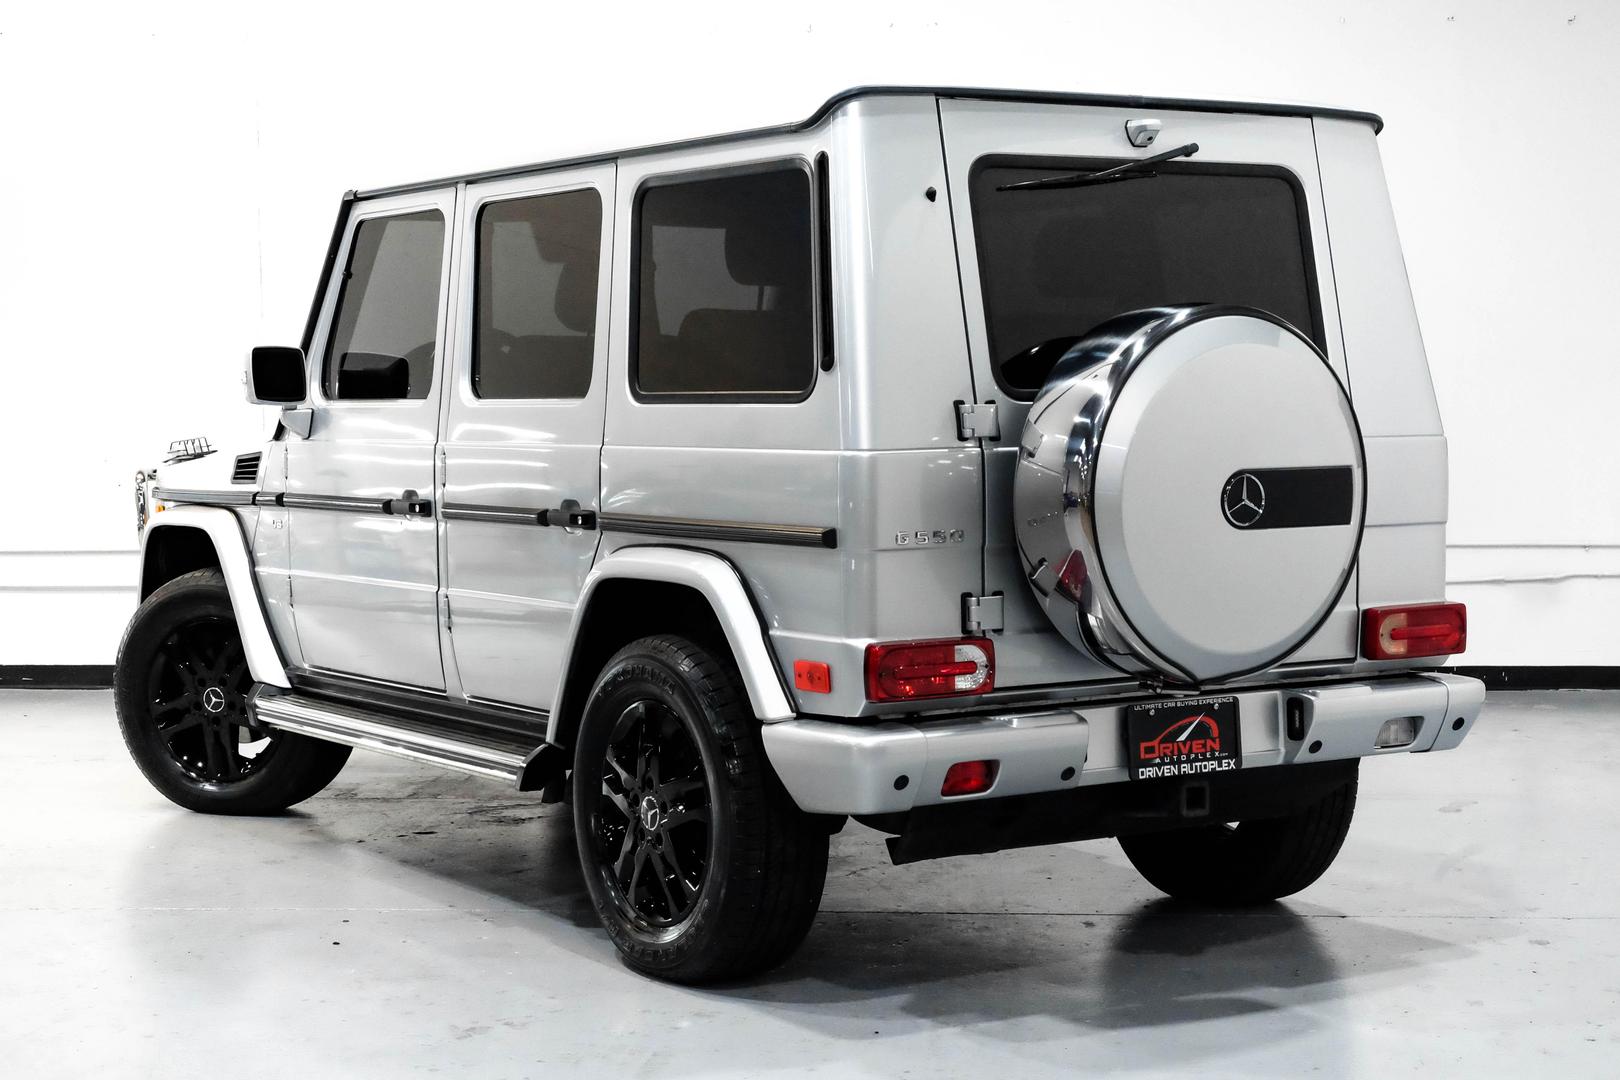 USED MERCEDES-BENZ G-CLASS 2012 for sale in Dallas, TX | Driven Autoplex - Pre-Owned Luxury ...